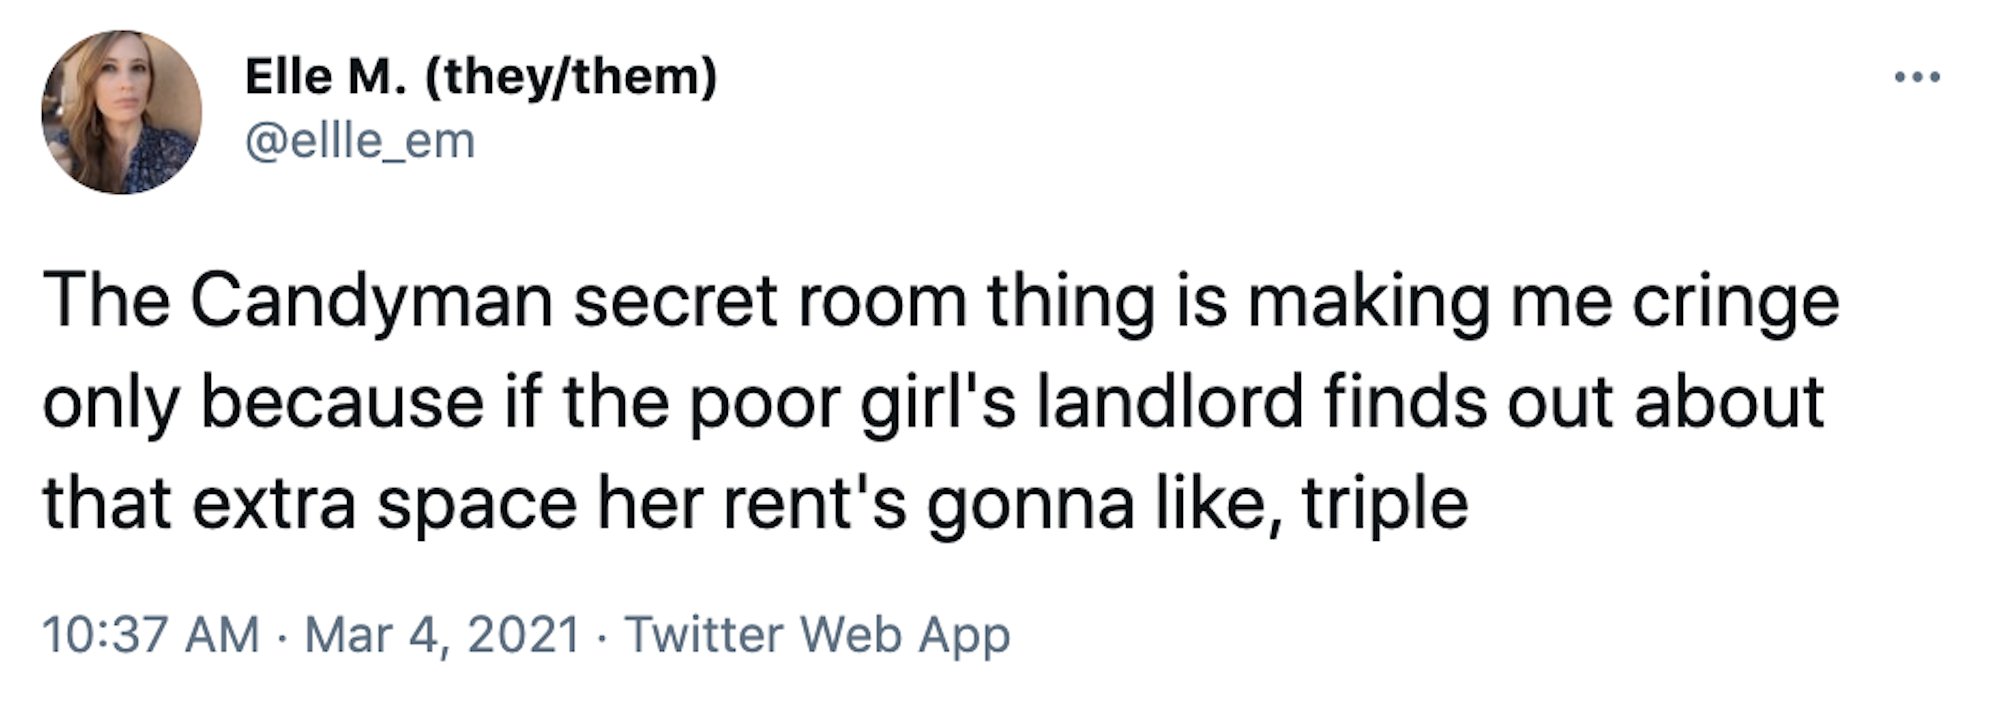 The Candyman secret room thing is making me cringe only because if the poor girl's landlord finds out about that extra space her rent's gonna like, triple